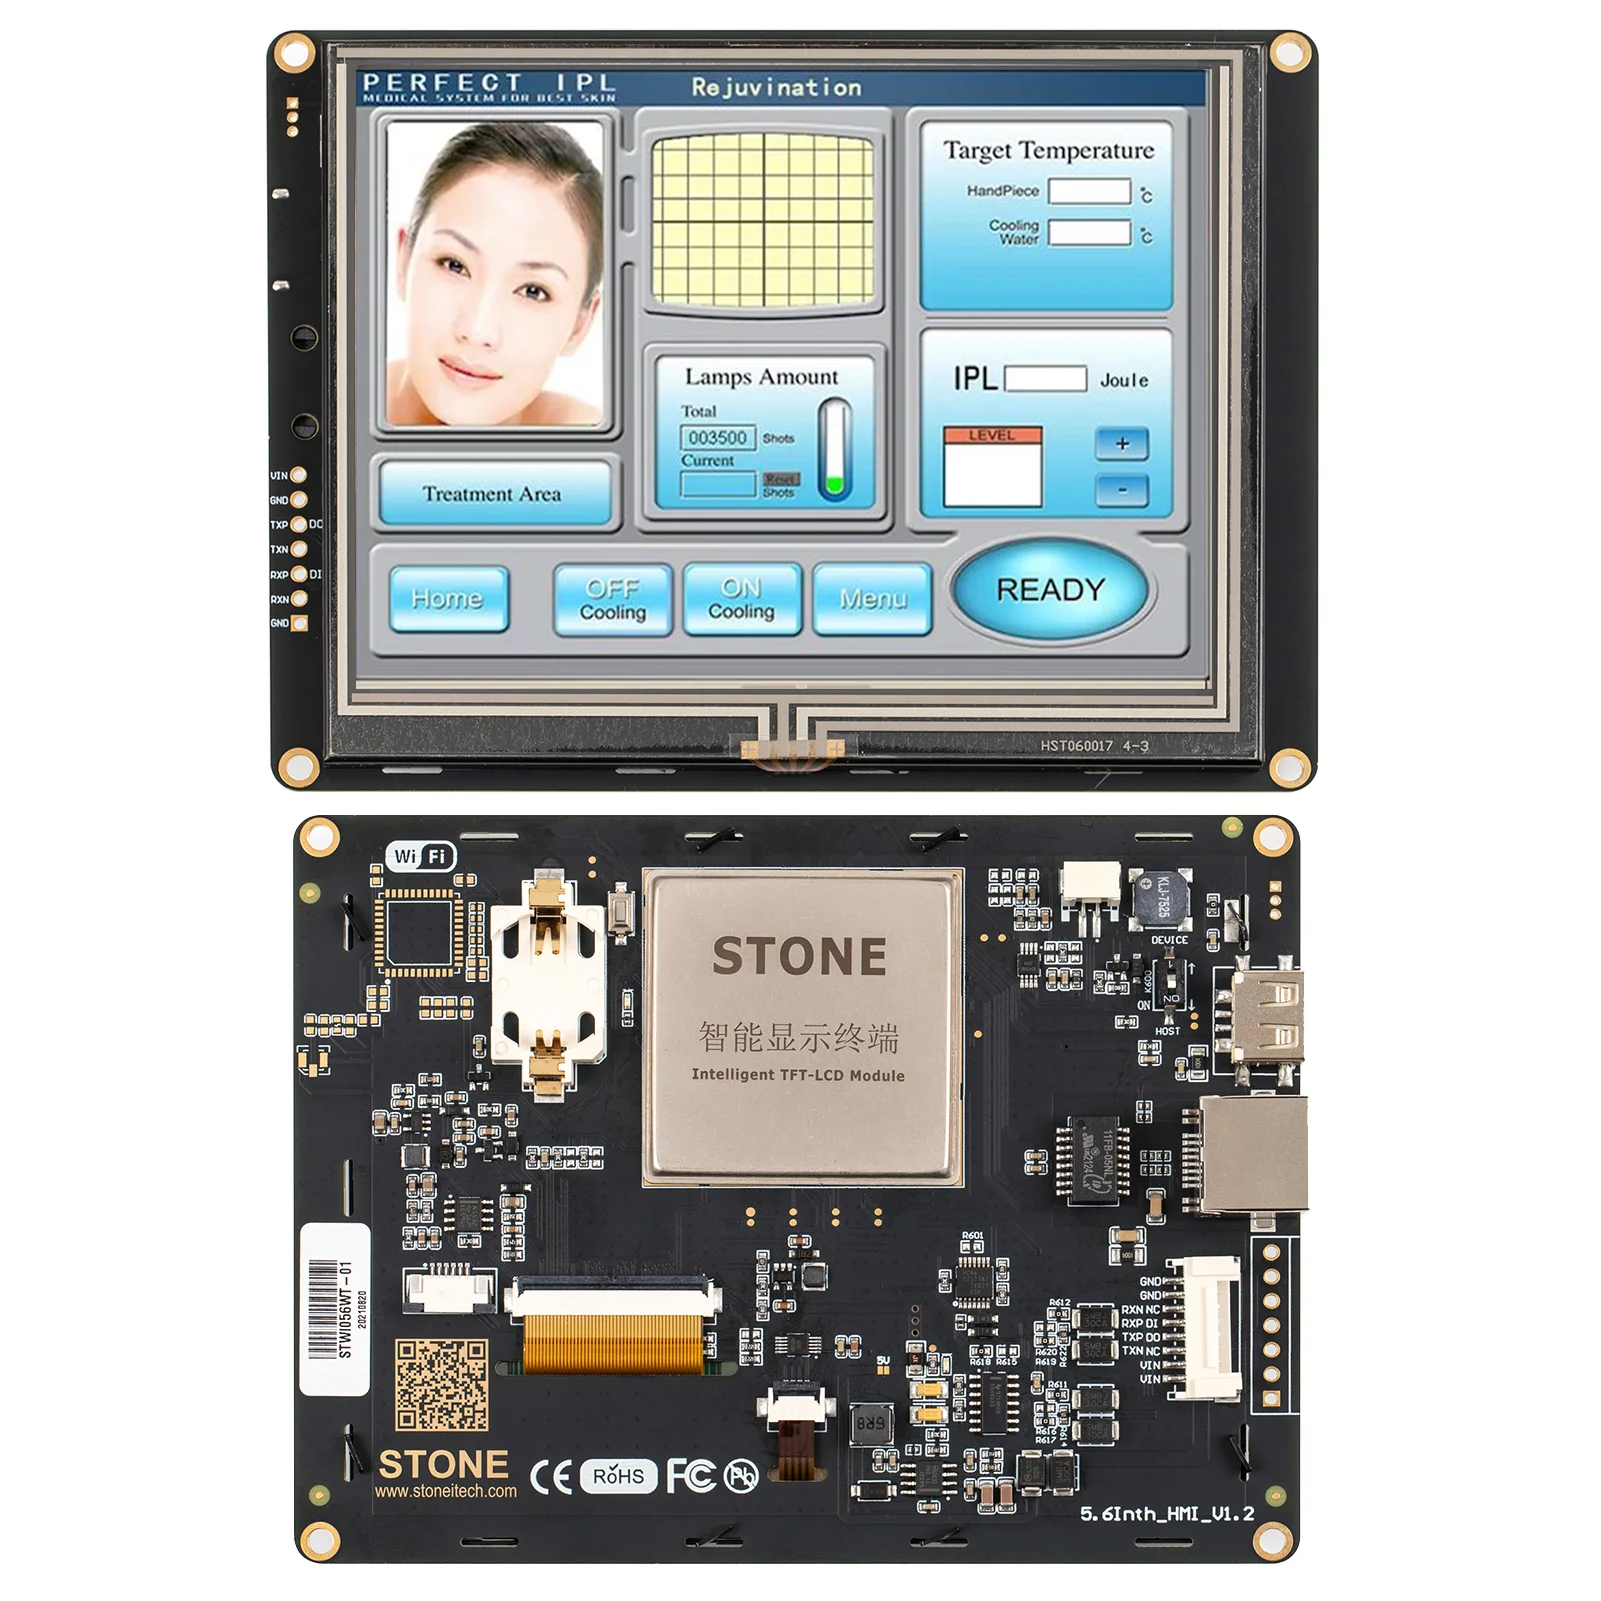 5.6 inch touchscreen Tft Lcd Module with wide visual angle and range temperature